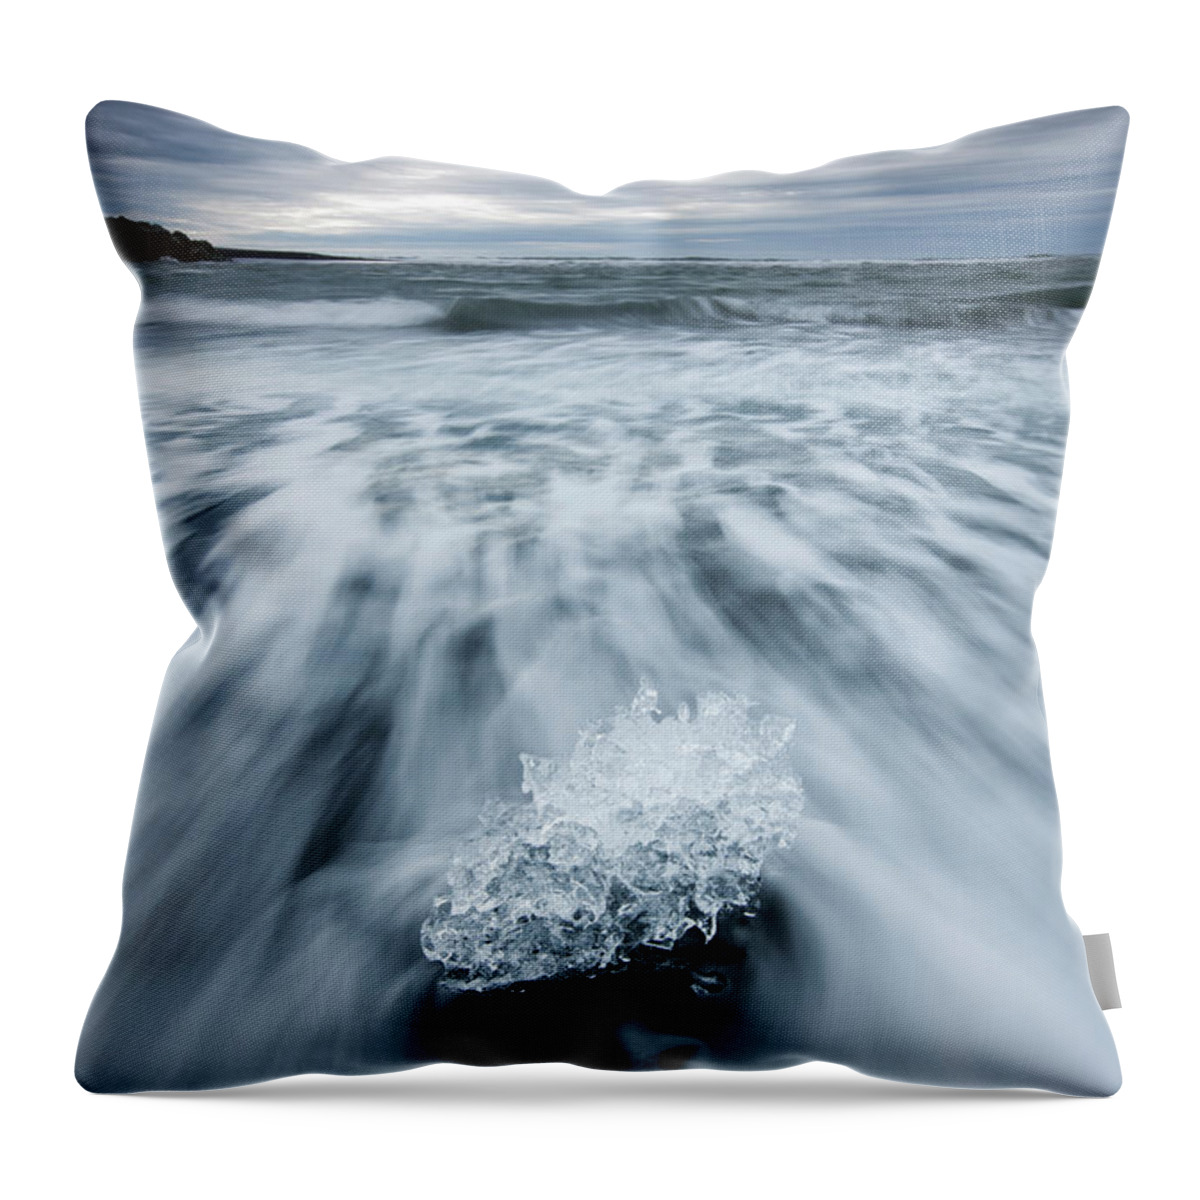 Scenics Throw Pillow featuring the photograph Icebergs In Surf By Jokulsarlon, Iceland by Paul Souders